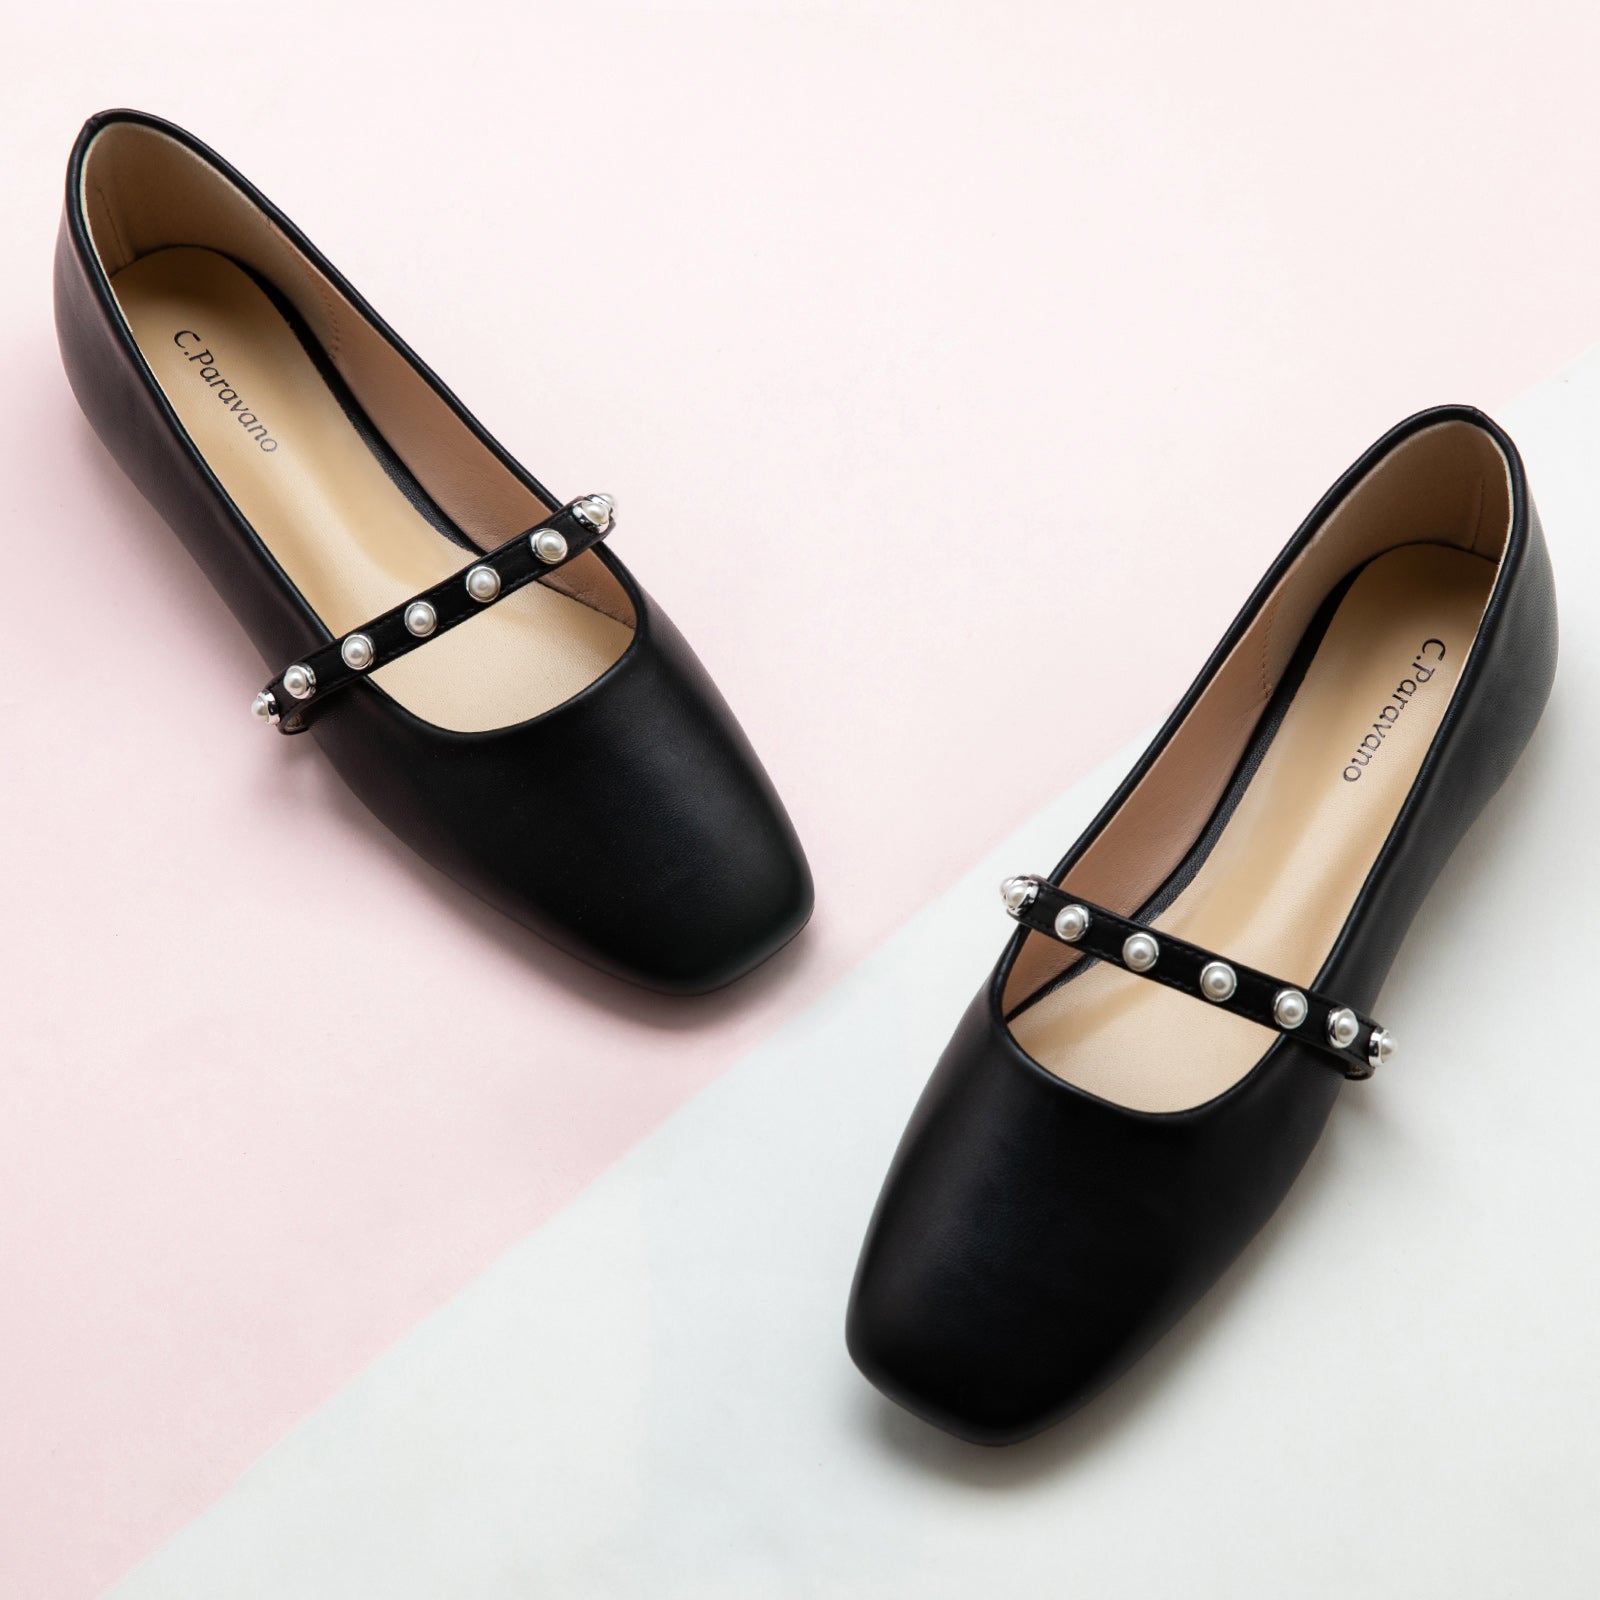  MARY JANE E Single Stripe with Pearl in Black, a classic and sophisticated choice for a sleek and polished look.